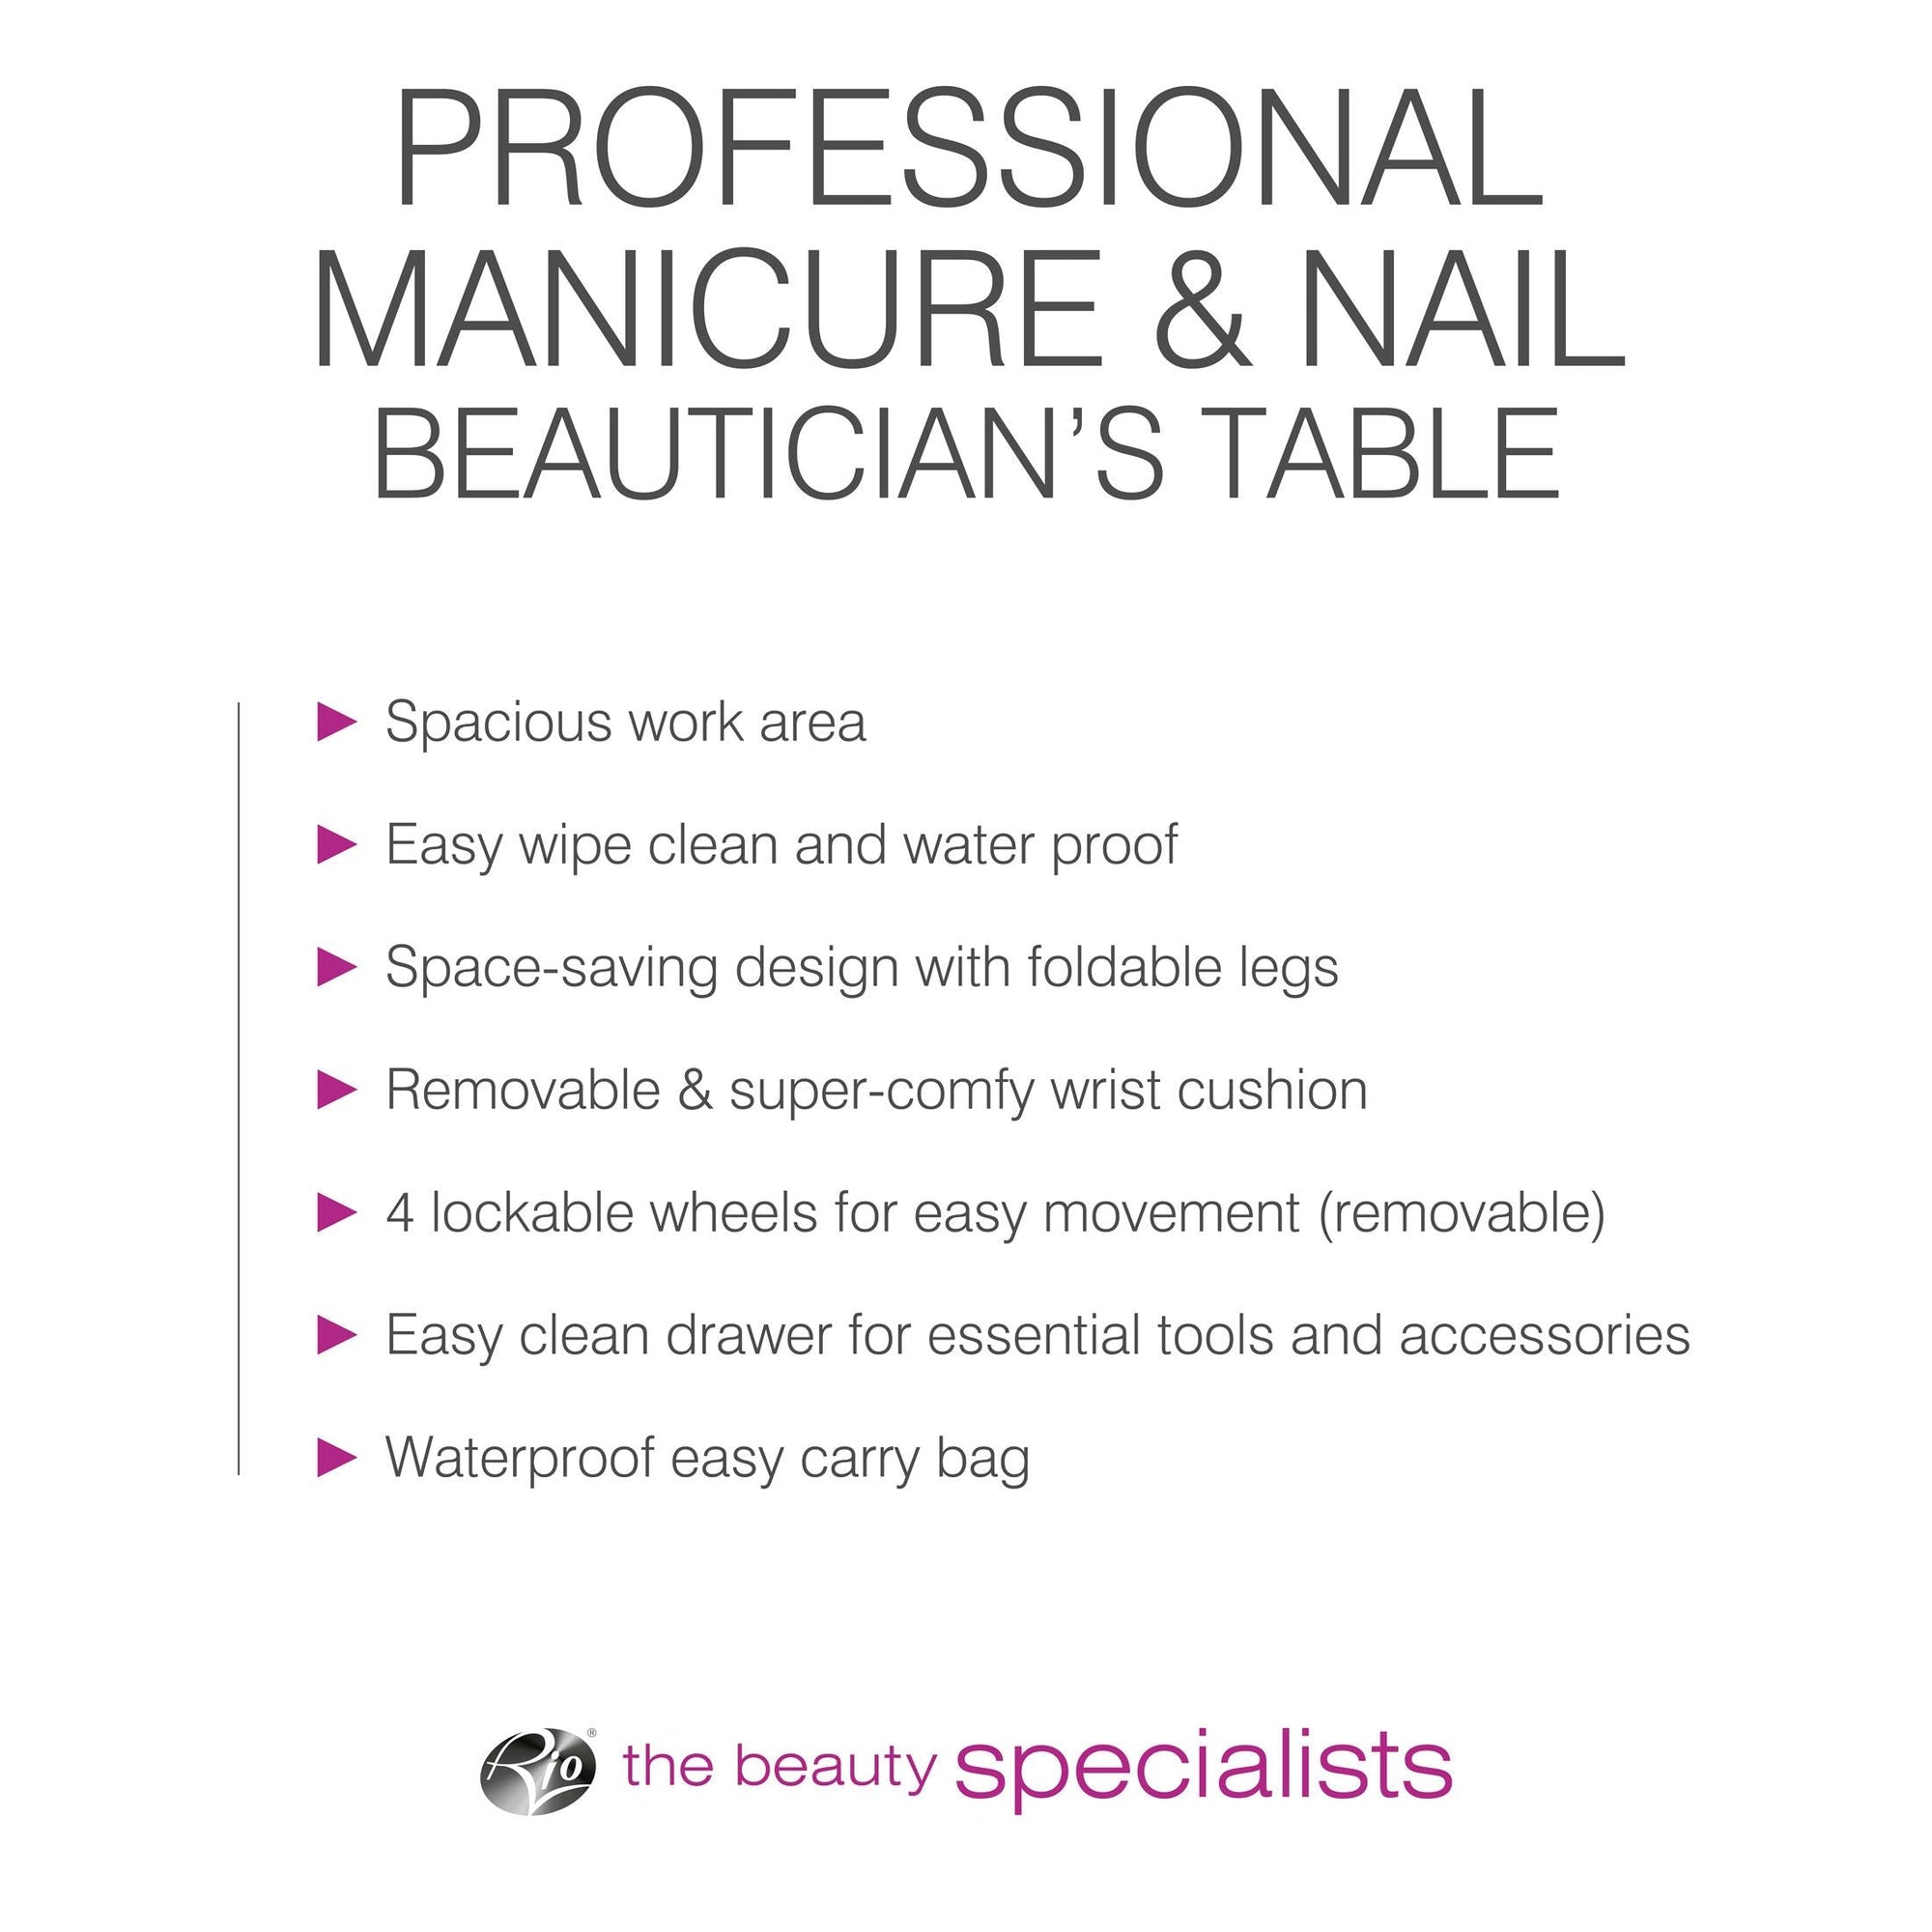 Professional Manicure & Nail Beauticians Table